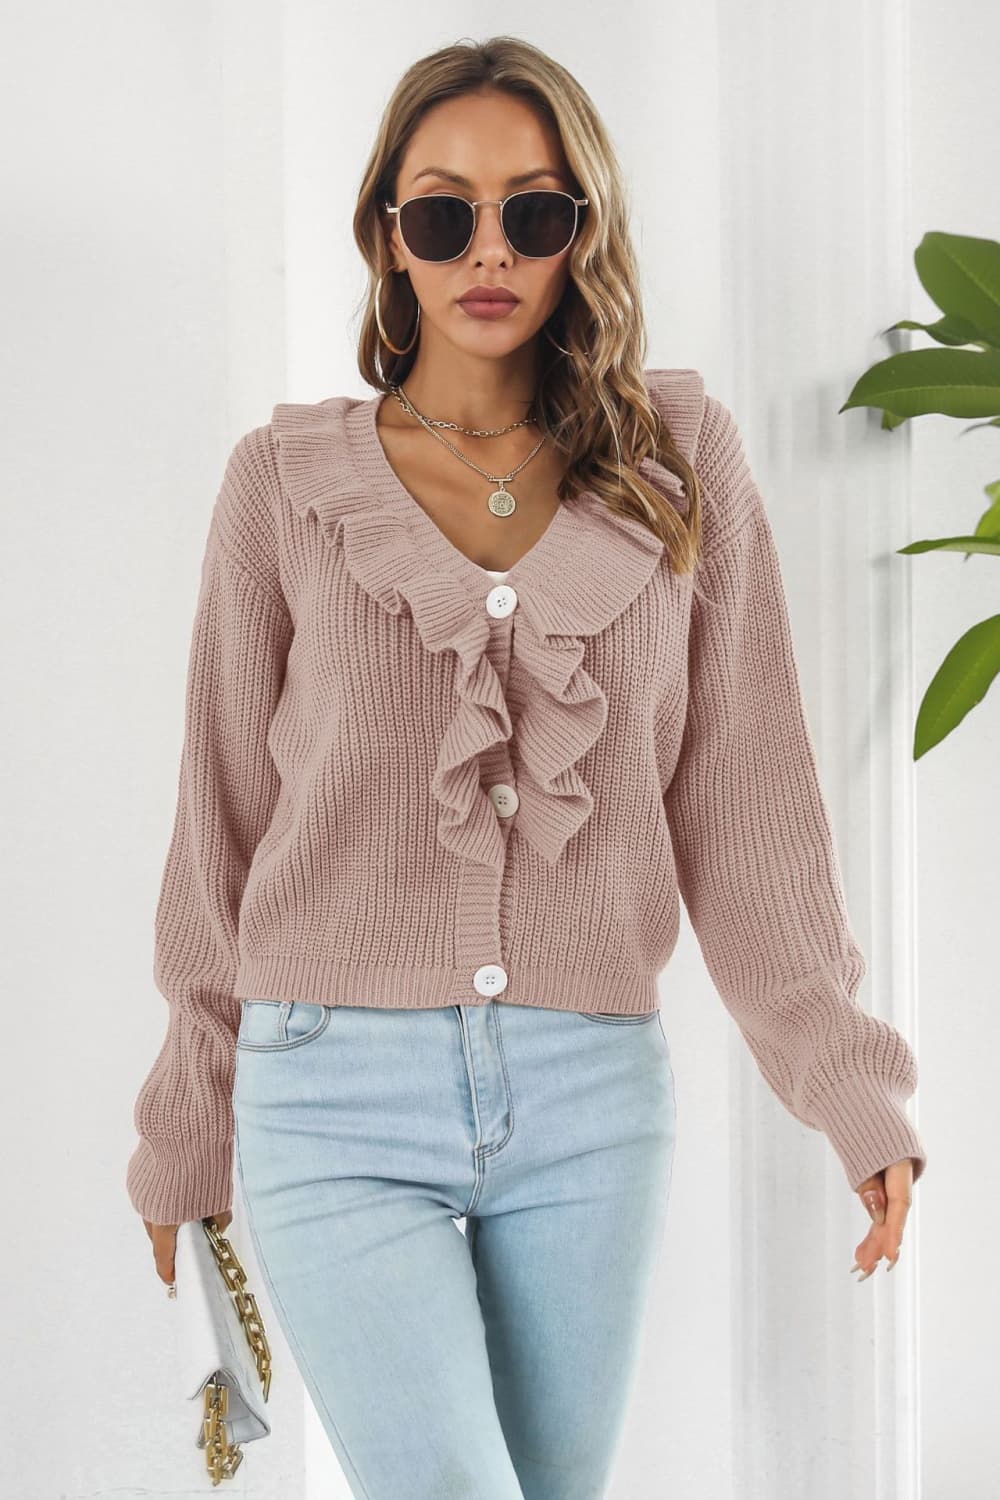 TrendiStyles Ruffle Trim Button-Down Dropped Shoulder Sweater 🦋